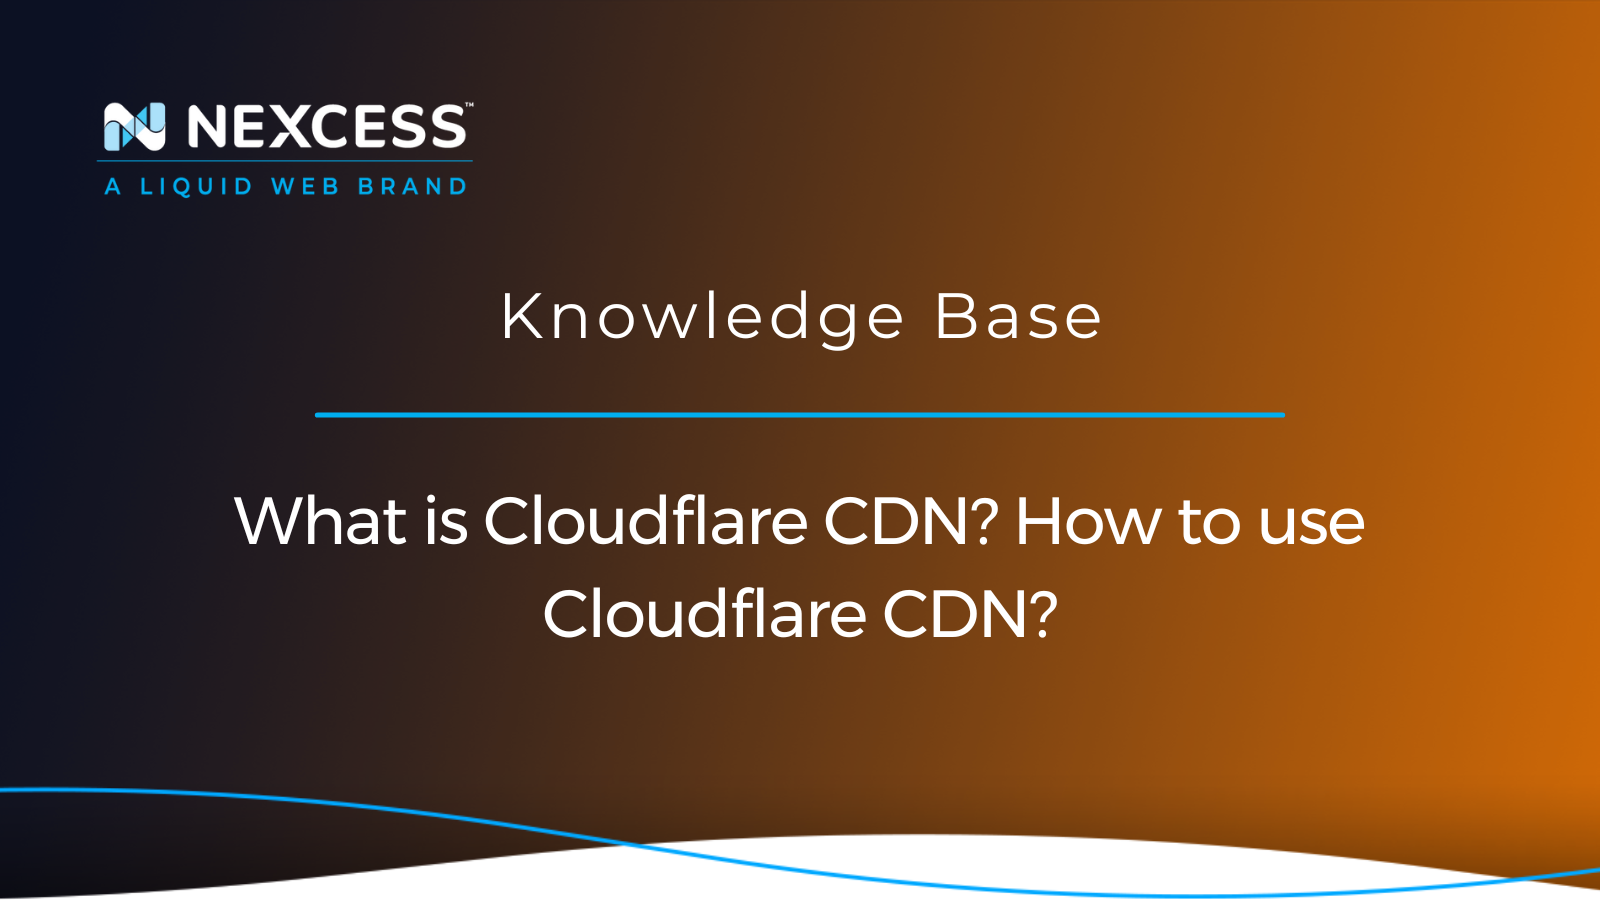 What is Cloudflare CDN? How to use Cloudflare CDN?